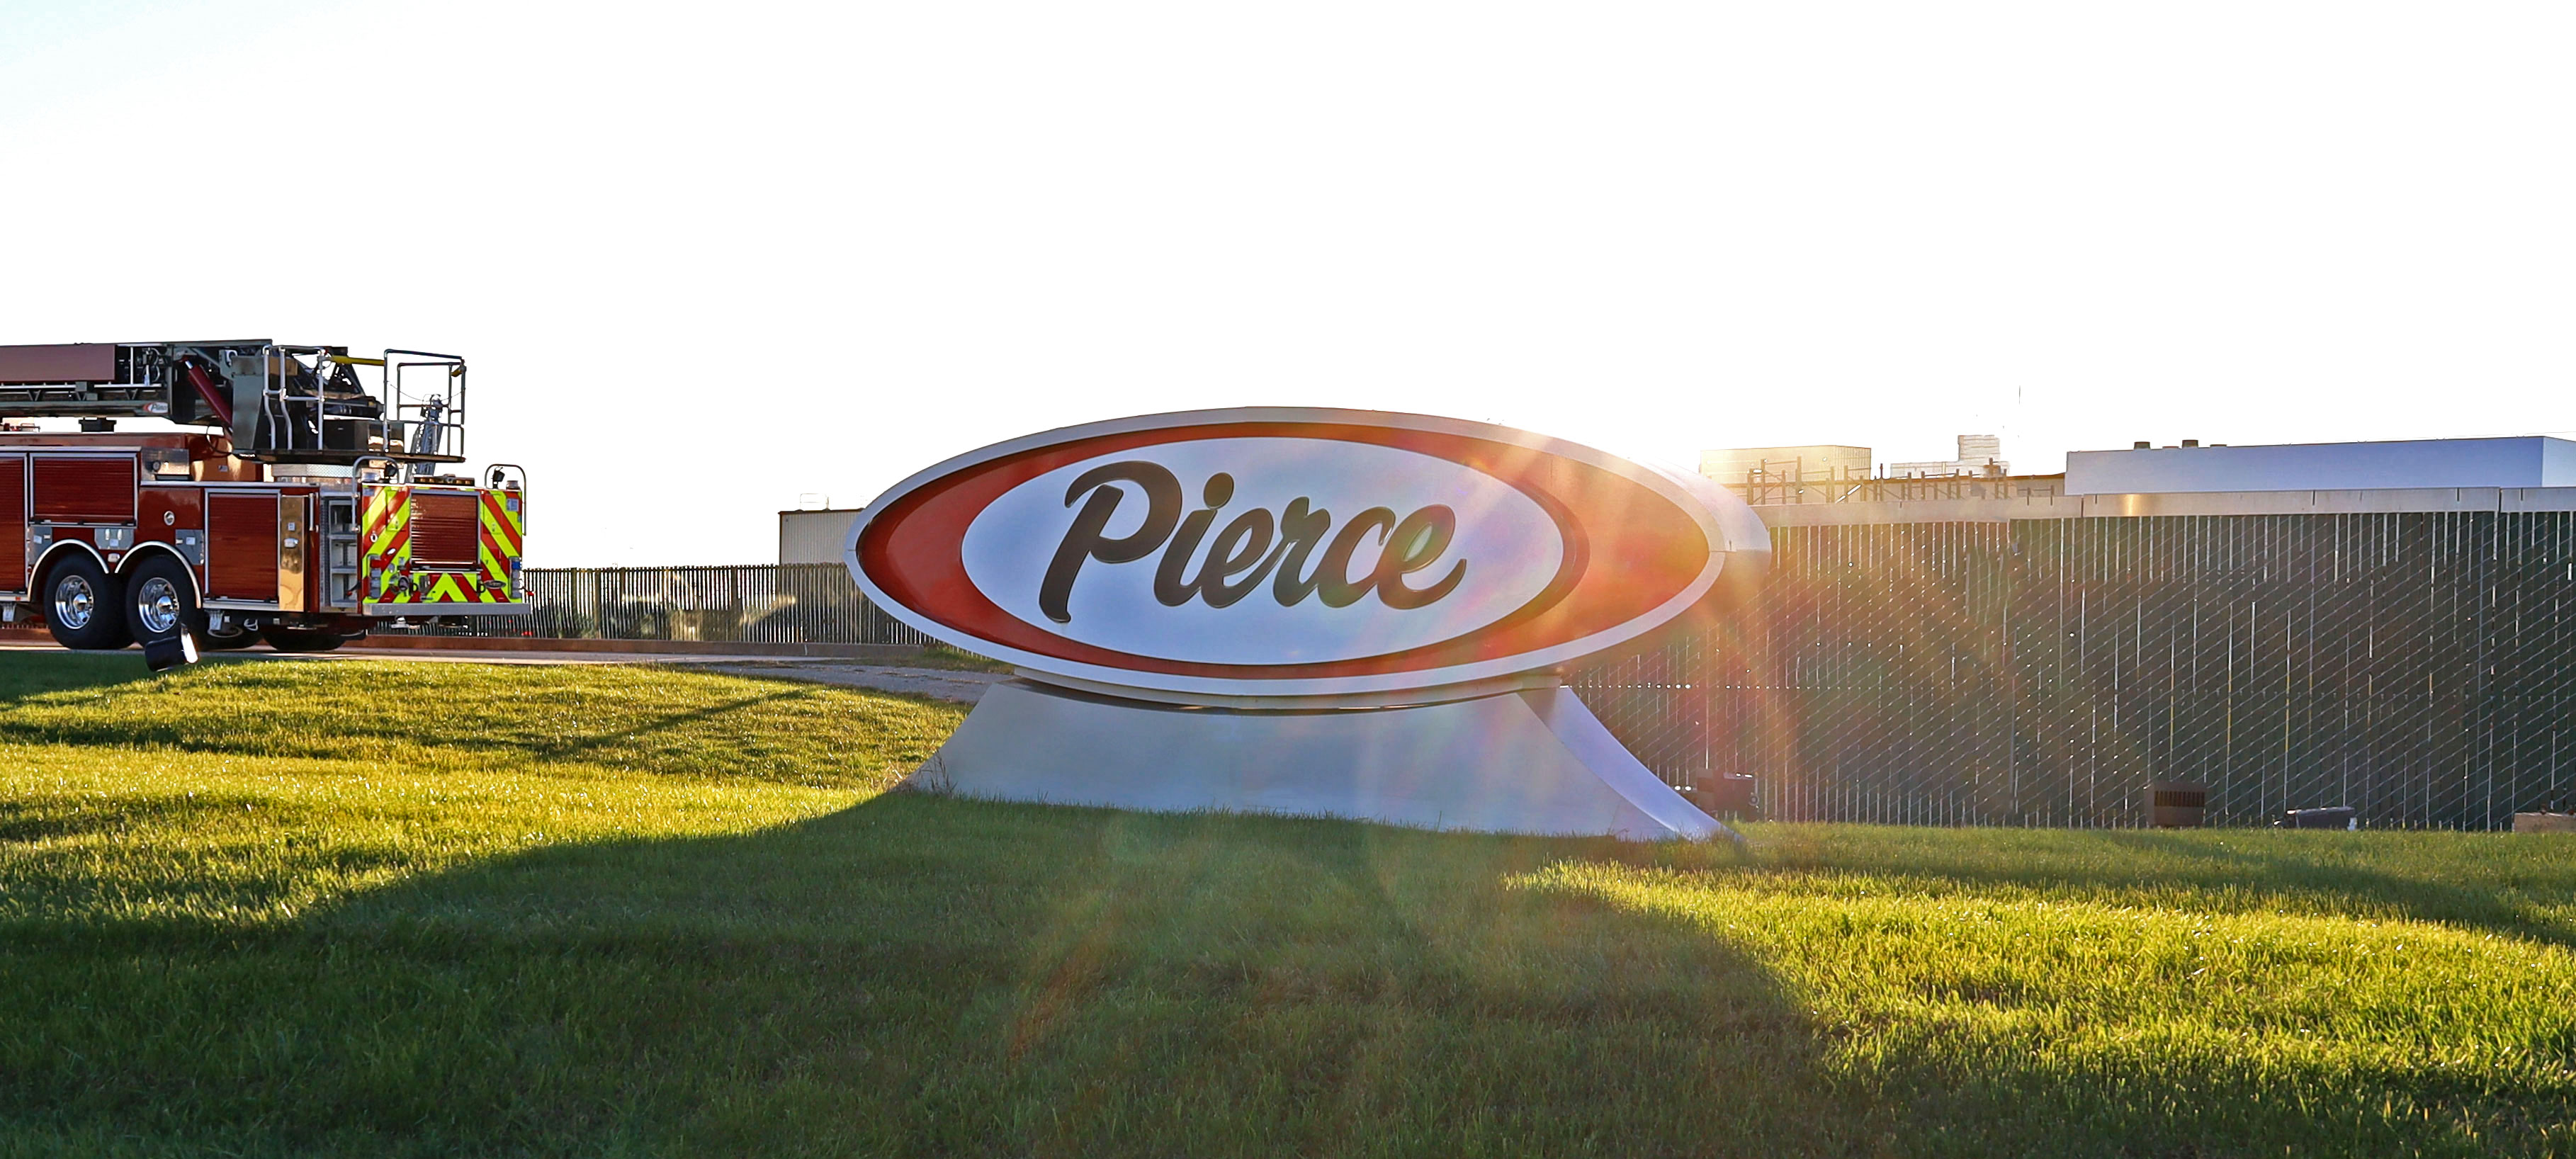 Pierce Manufacturing sign with sun setting in background